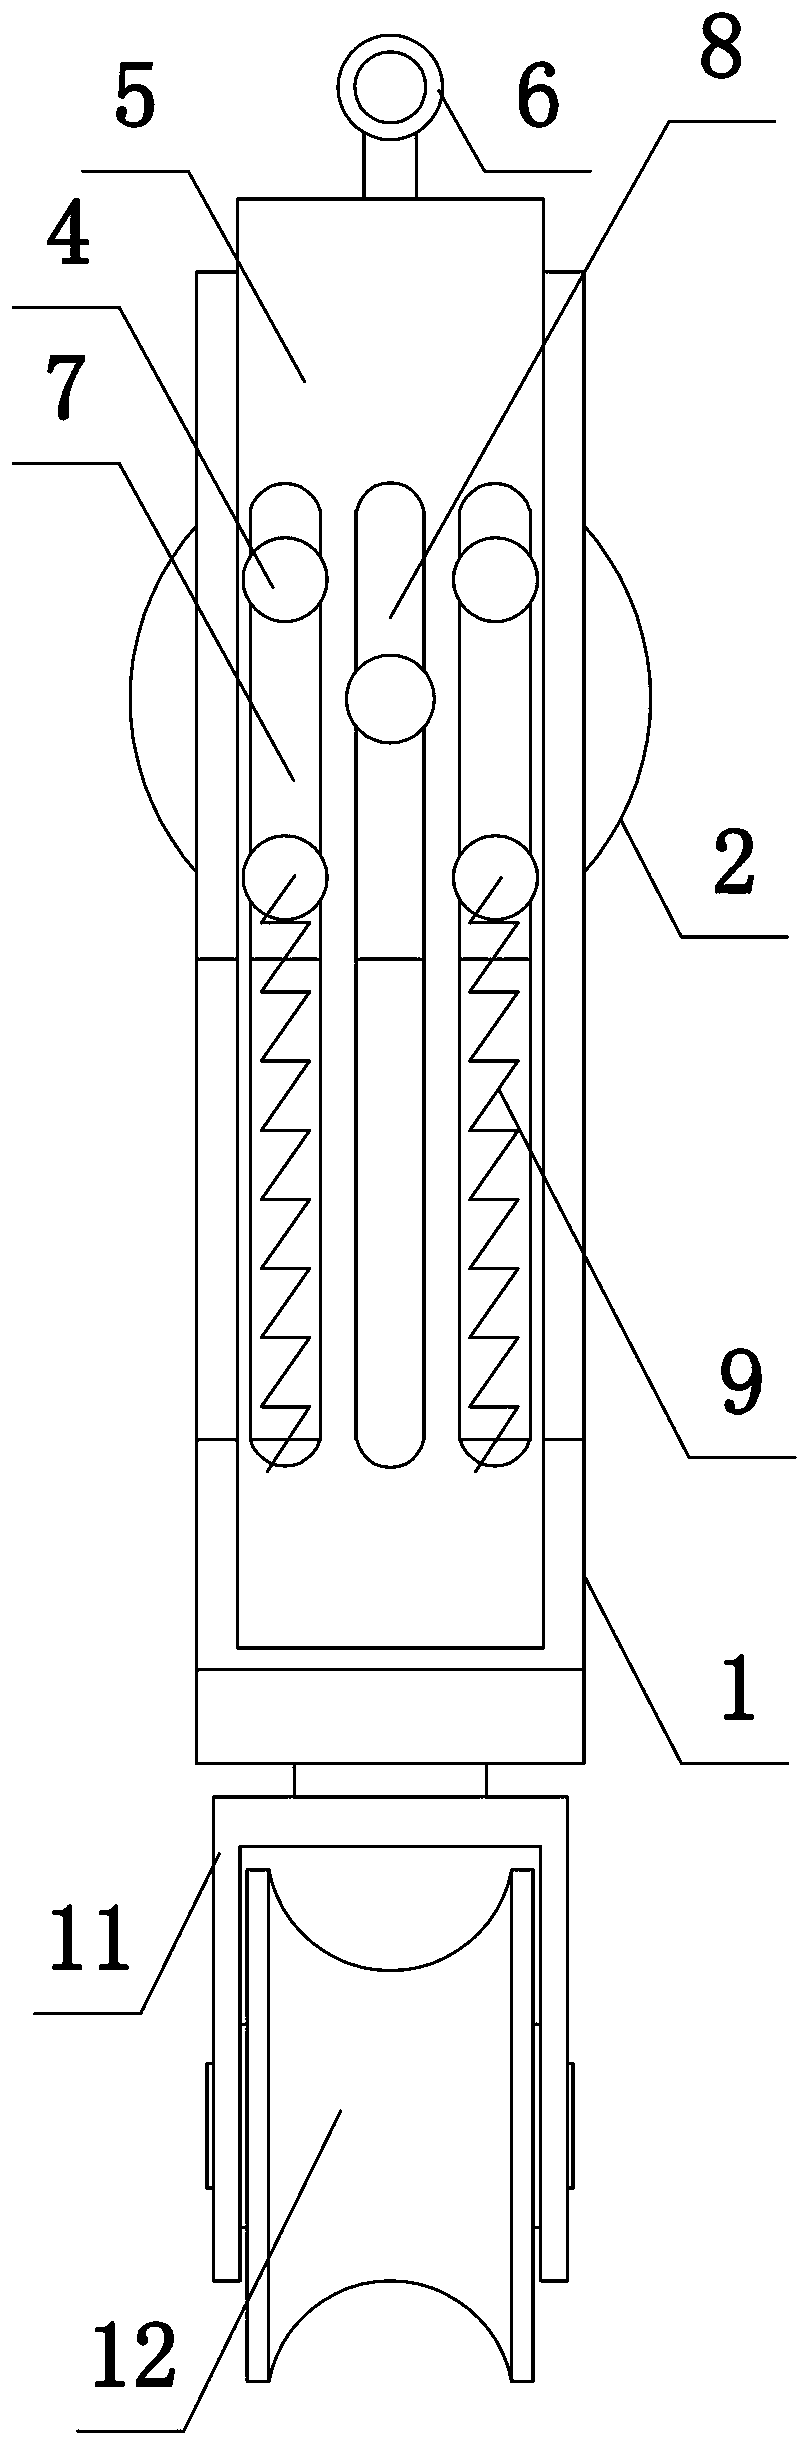 Anti-dropping tackle for electric transmission lines